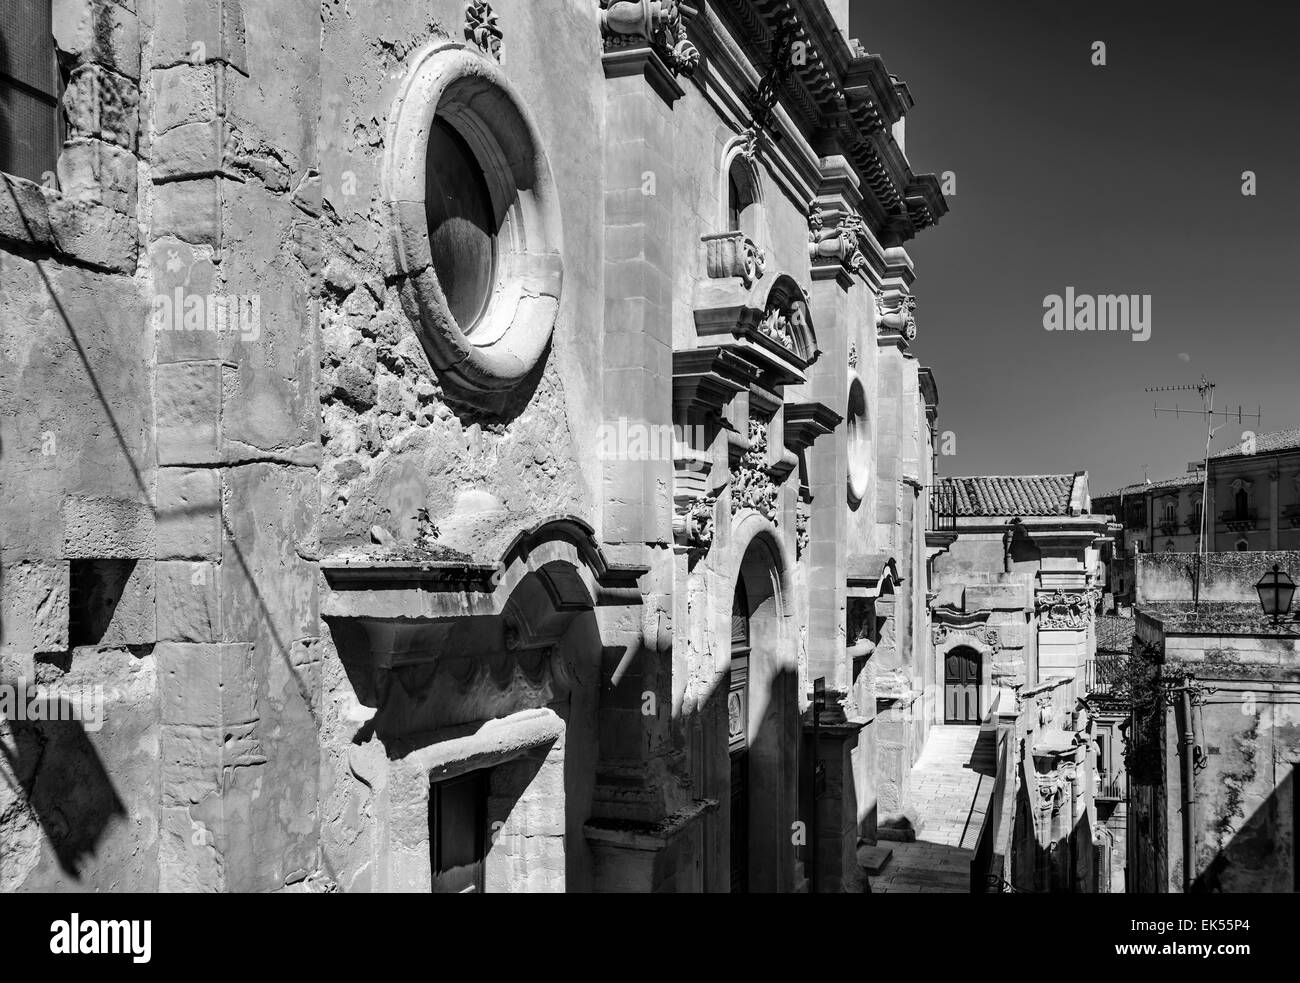 S maria Black and White Stock Photos & Images - Page 3 - Alamy